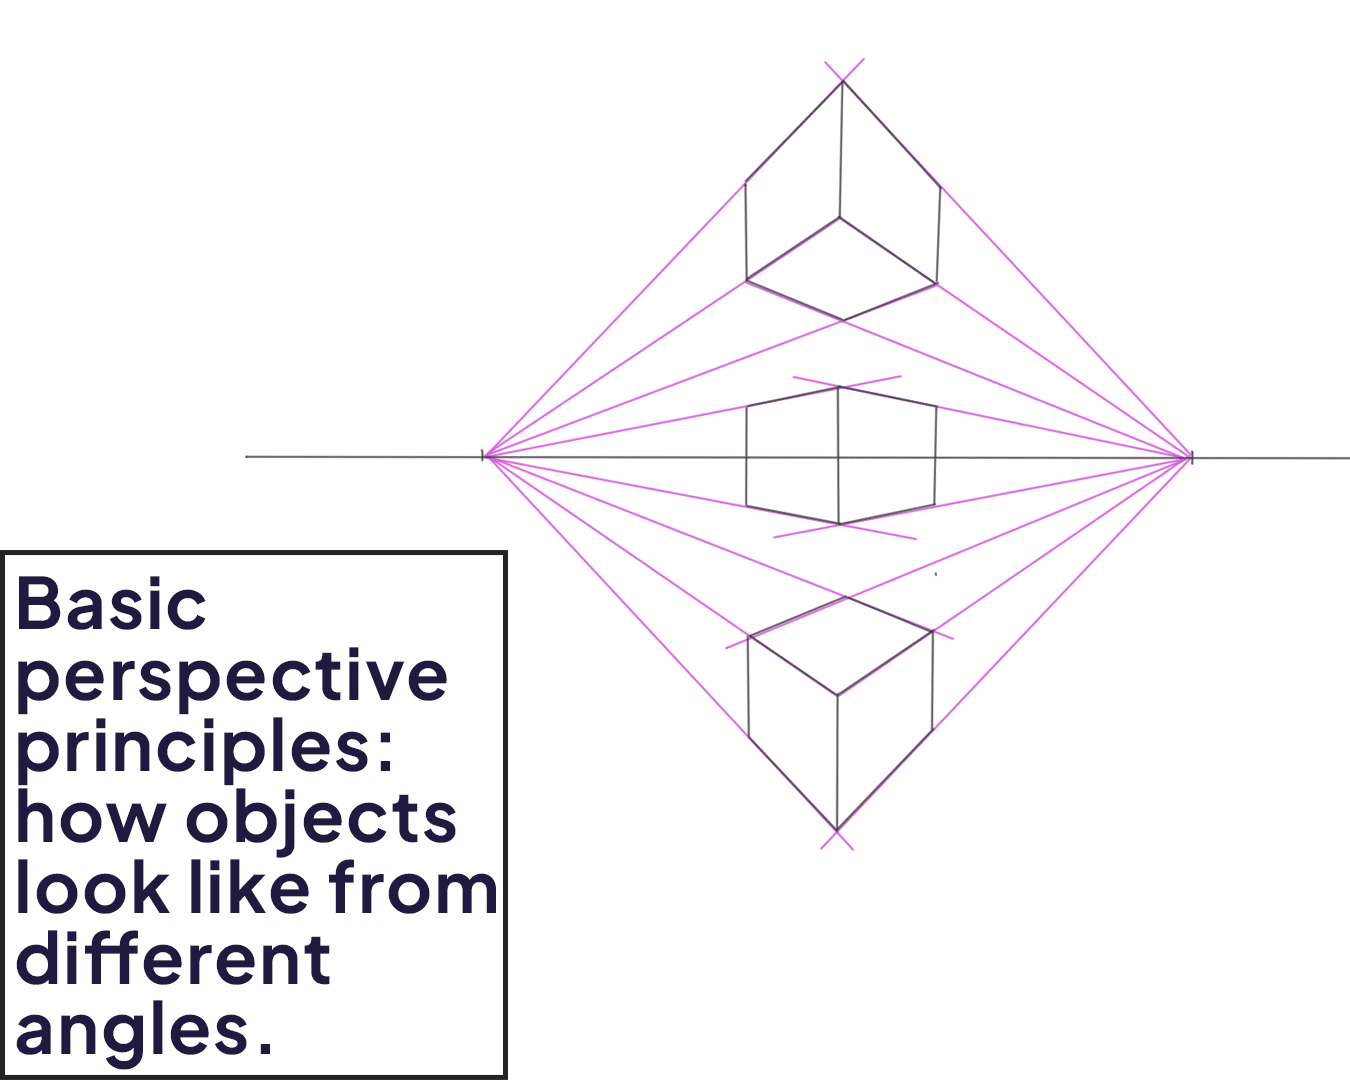 Basic perspective principles